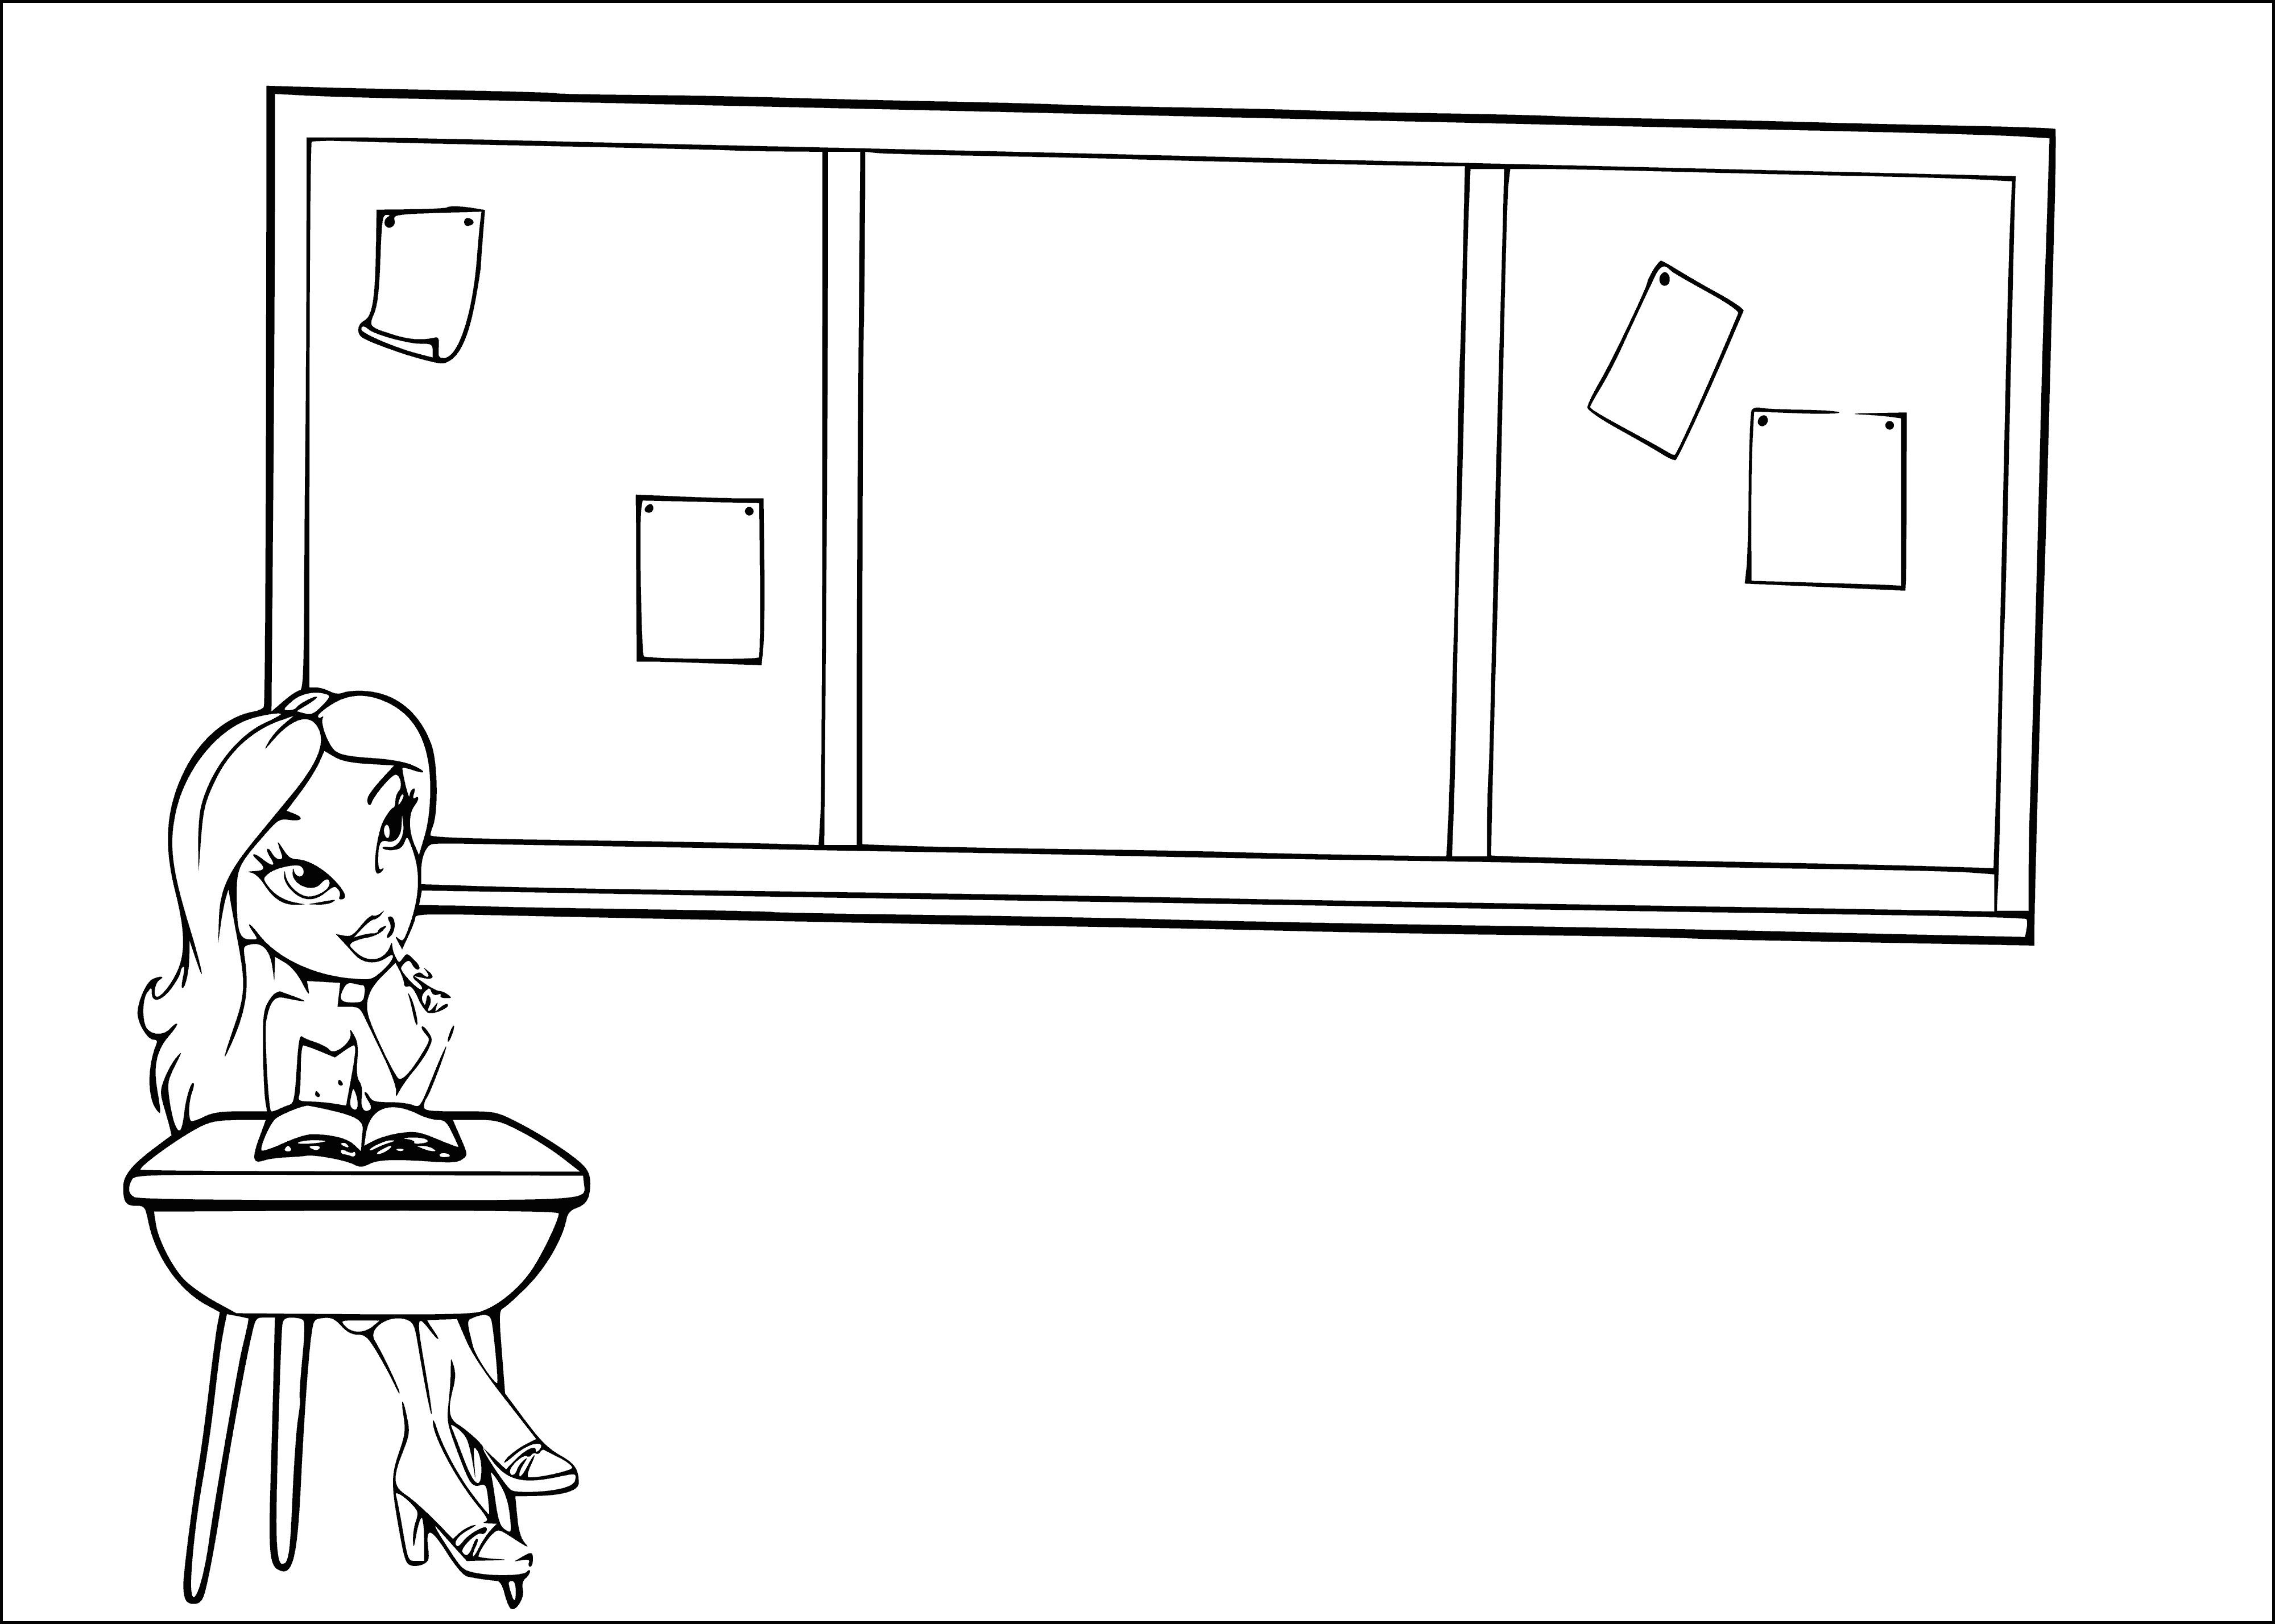 Bartz at the desk coloring page